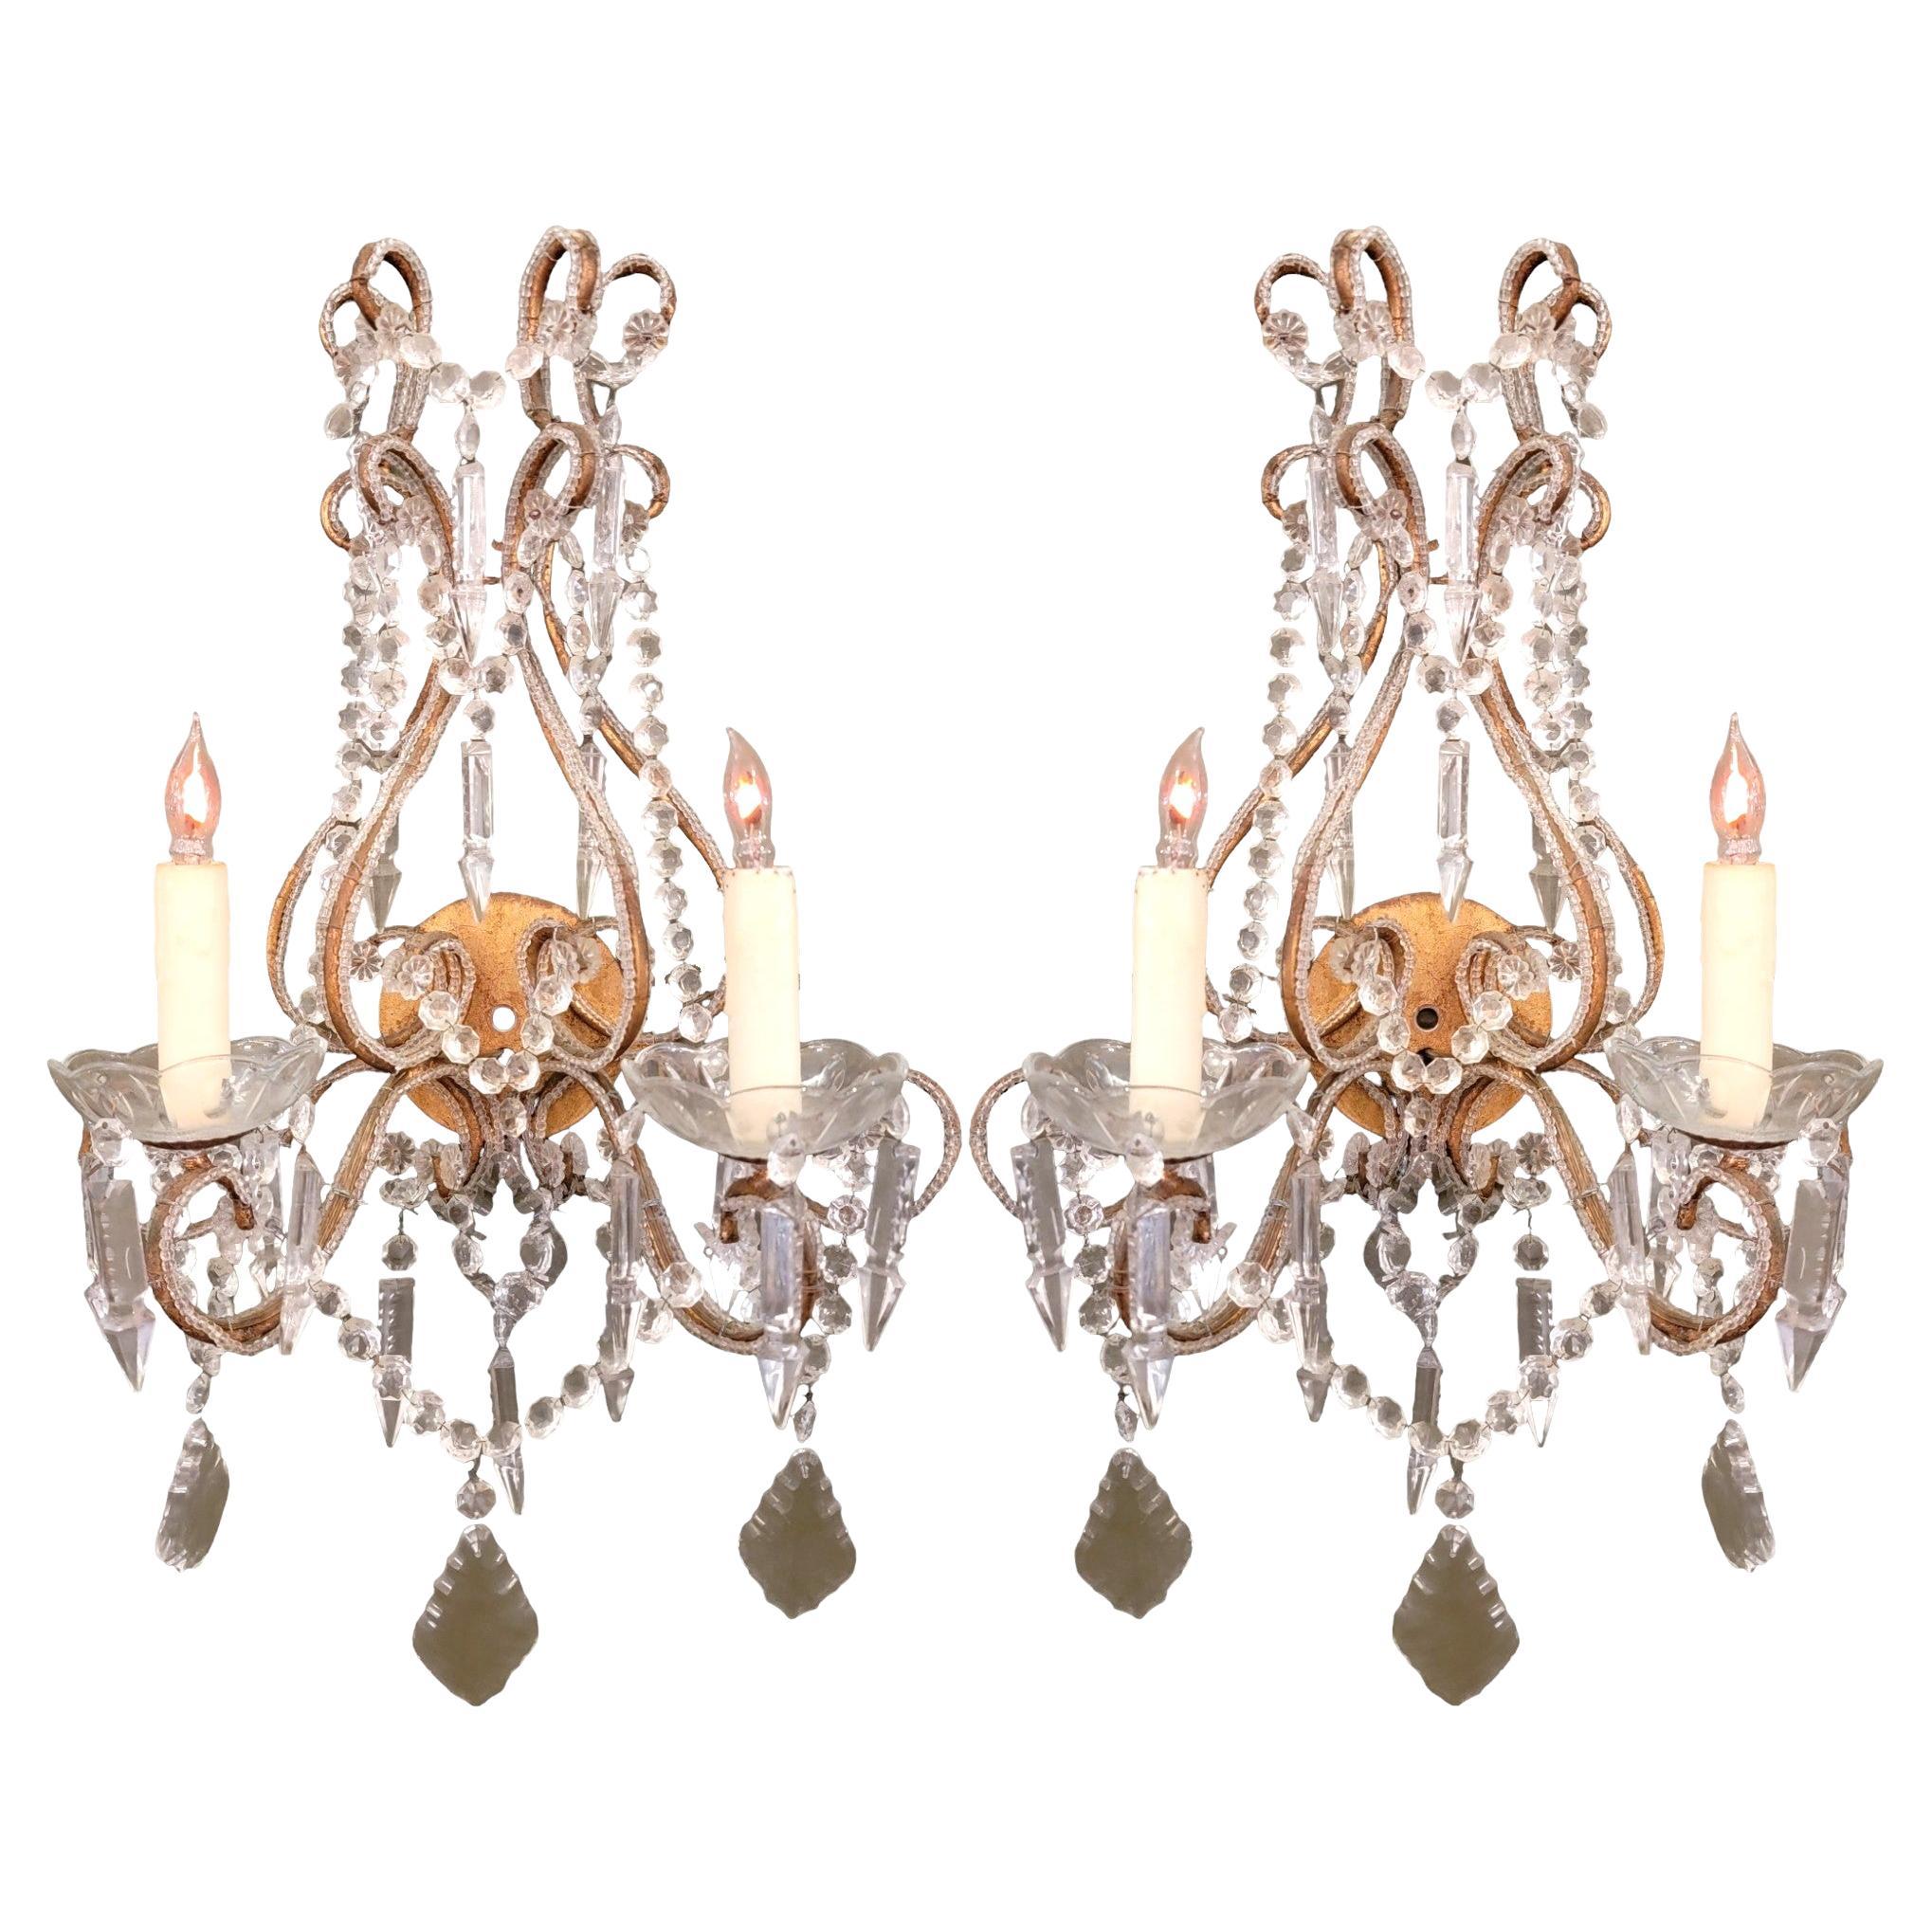 Vintage Pair of Italian Beaded Crystal and Brass Sconces